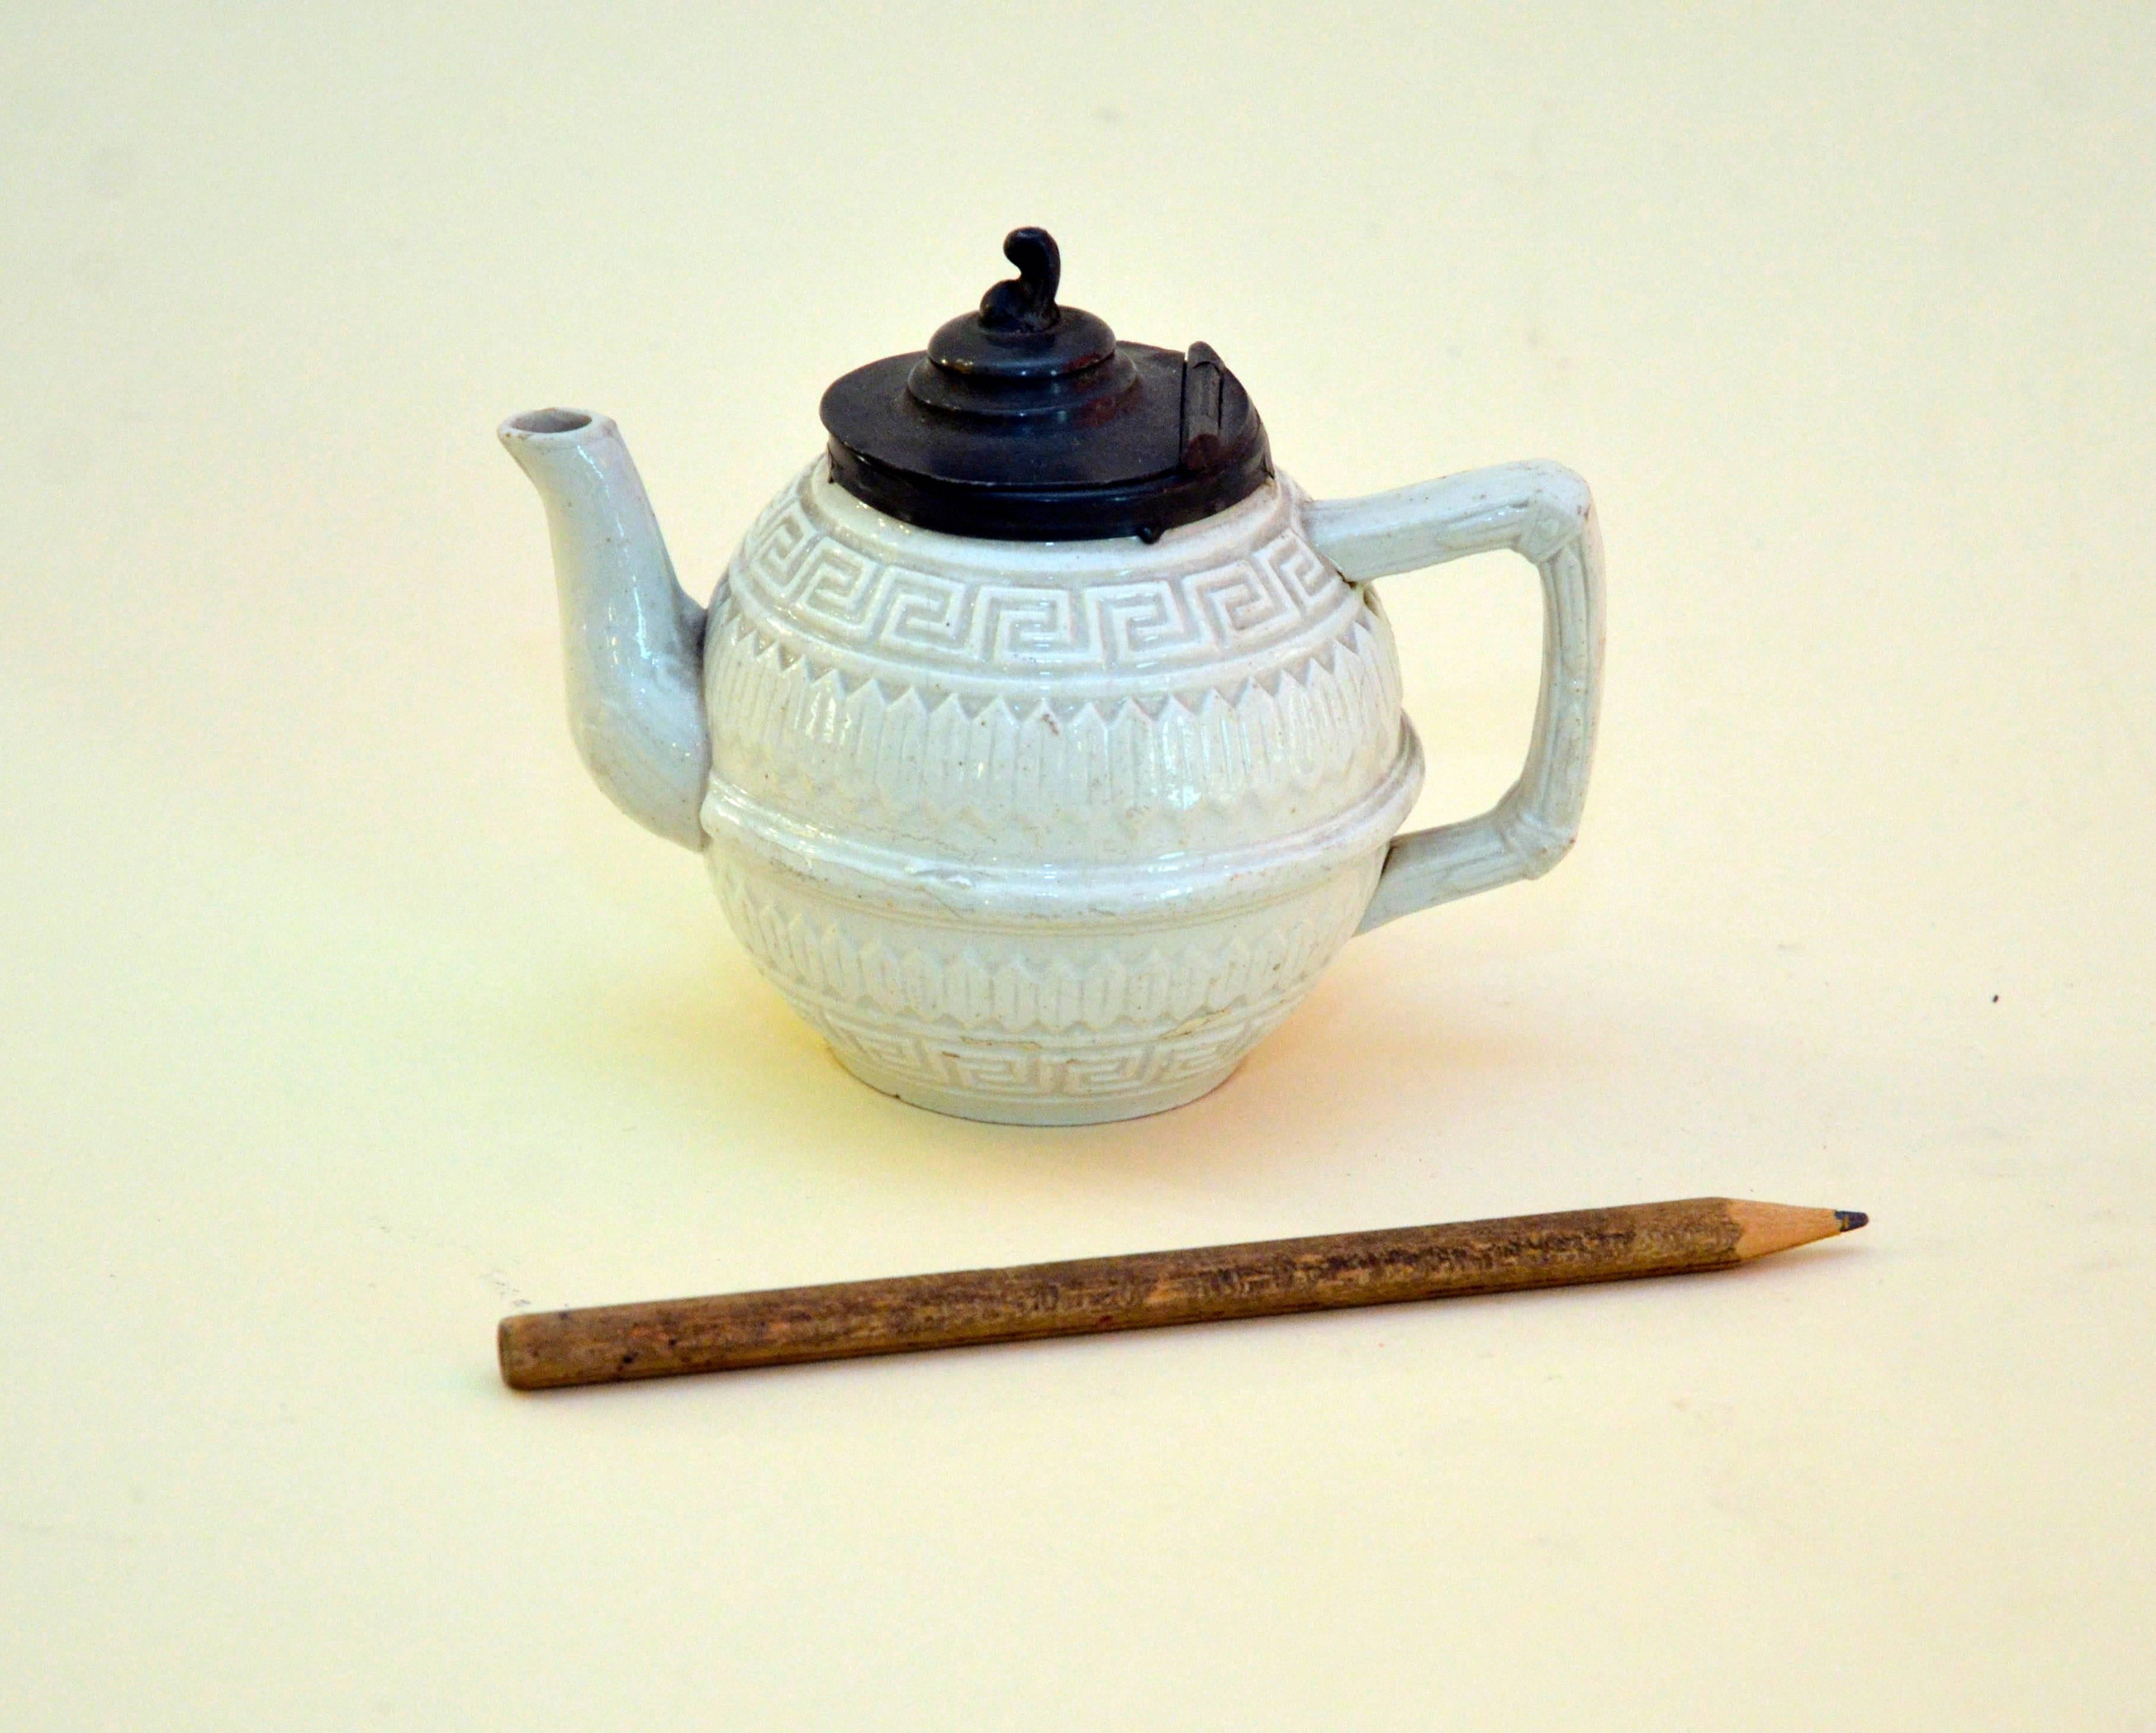 This salt glazed ironstone small teapot with a Greek geometric relief and lid made from pewter was realized in Staffordshire, England in 1860s-1870s. Adding salt to the kiln in fact creates a gleaming but transparent glaze and a smooth, slightly